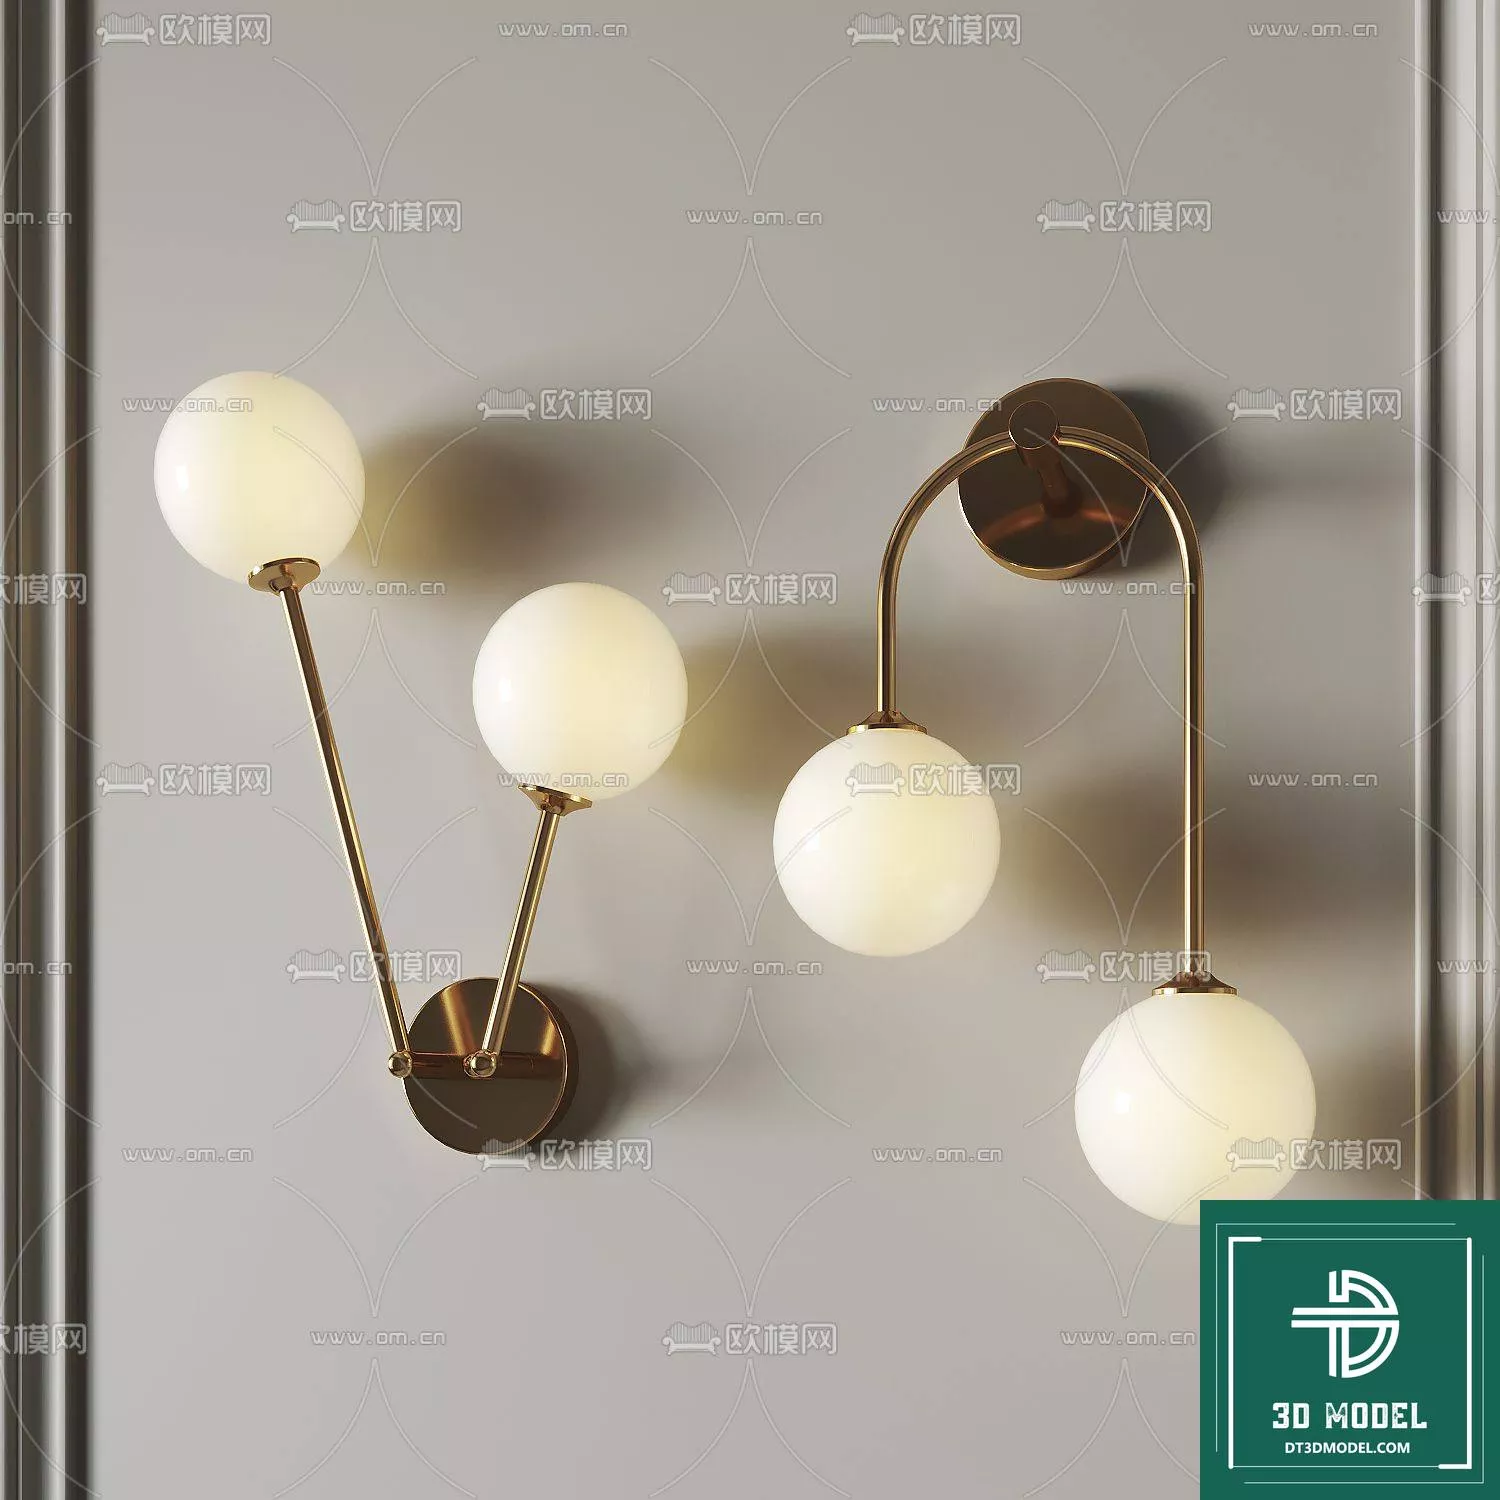 MODERN WALL LAMP - SKETCHUP 3D MODEL - VRAY OR ENSCAPE - ID16027